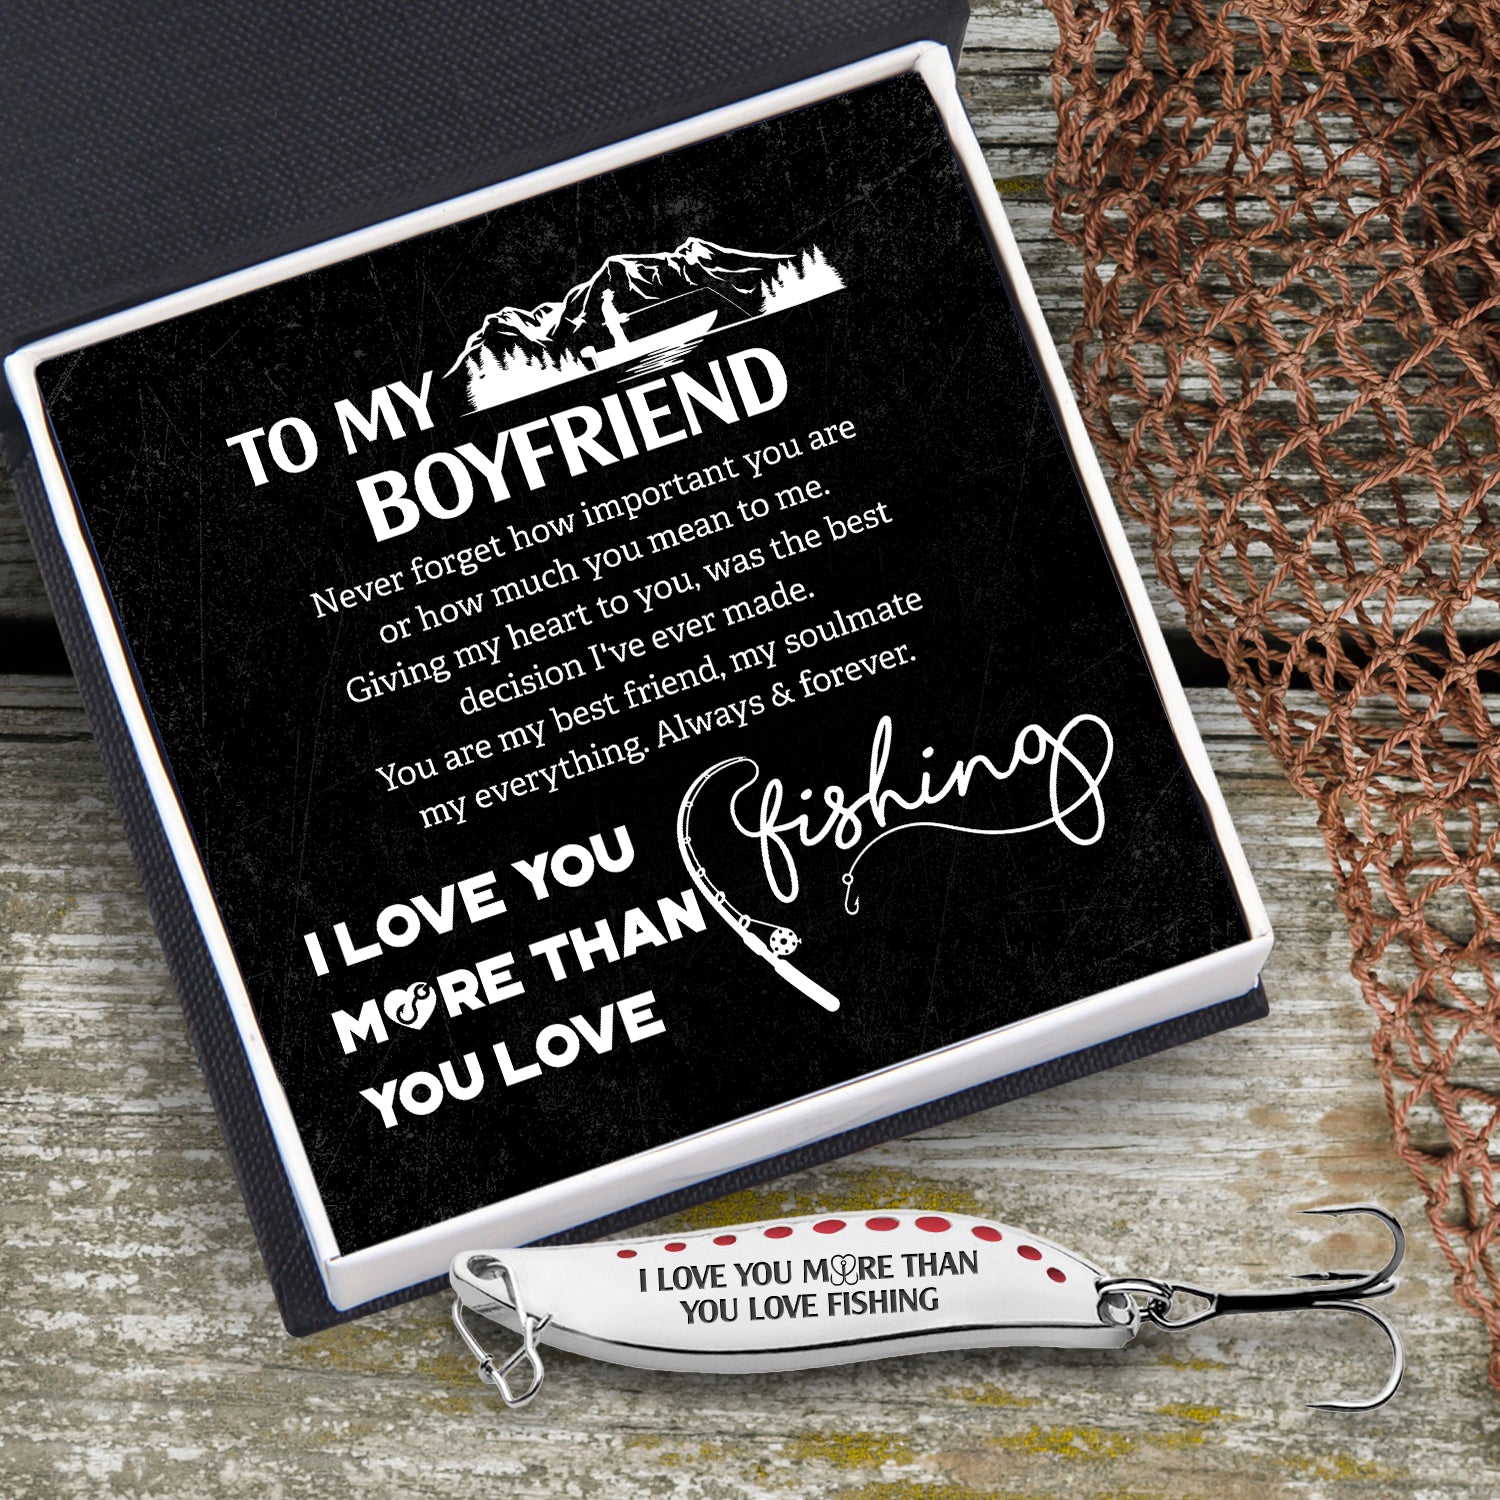 Personalized Fishing Lure Gift Hooked On You Fishing Lure Boyfriend Gift  Anniversary Gift Men's Gift Birthday Gift Personalized Name for Him